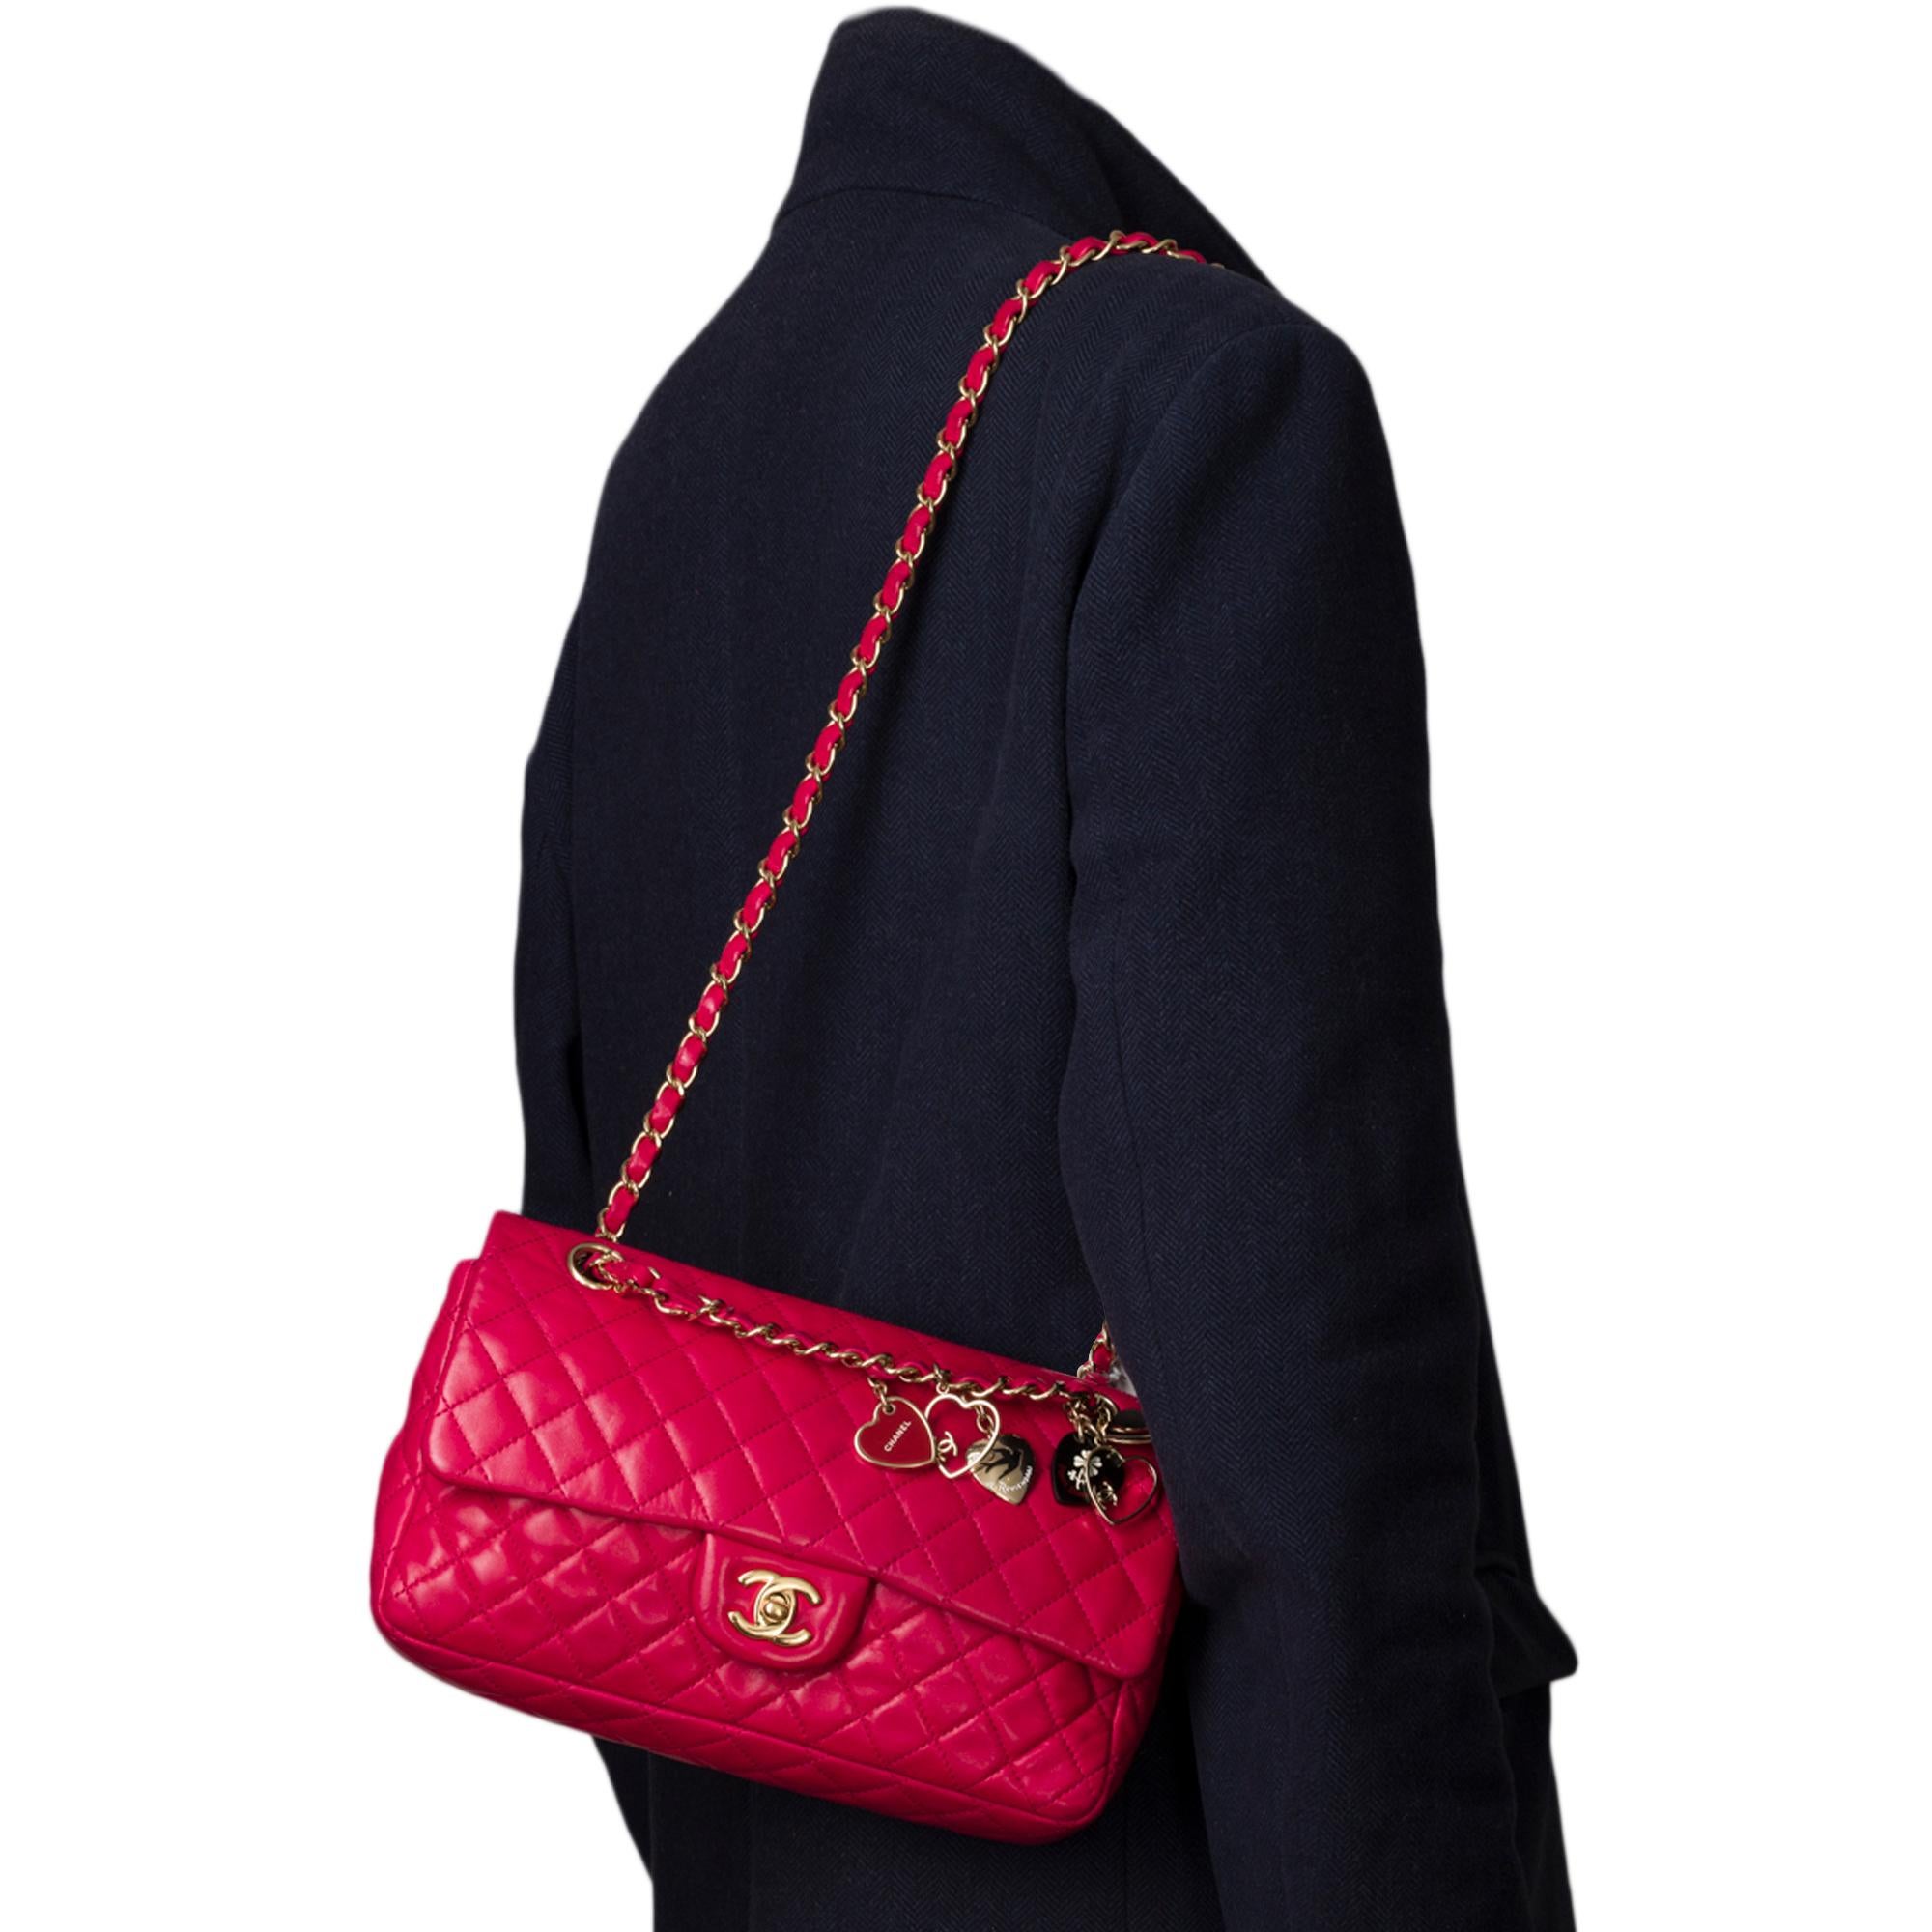 Valentine Hearts Chanel Classic Flap shoulder bag in Red quilted lambskin, GHW 4